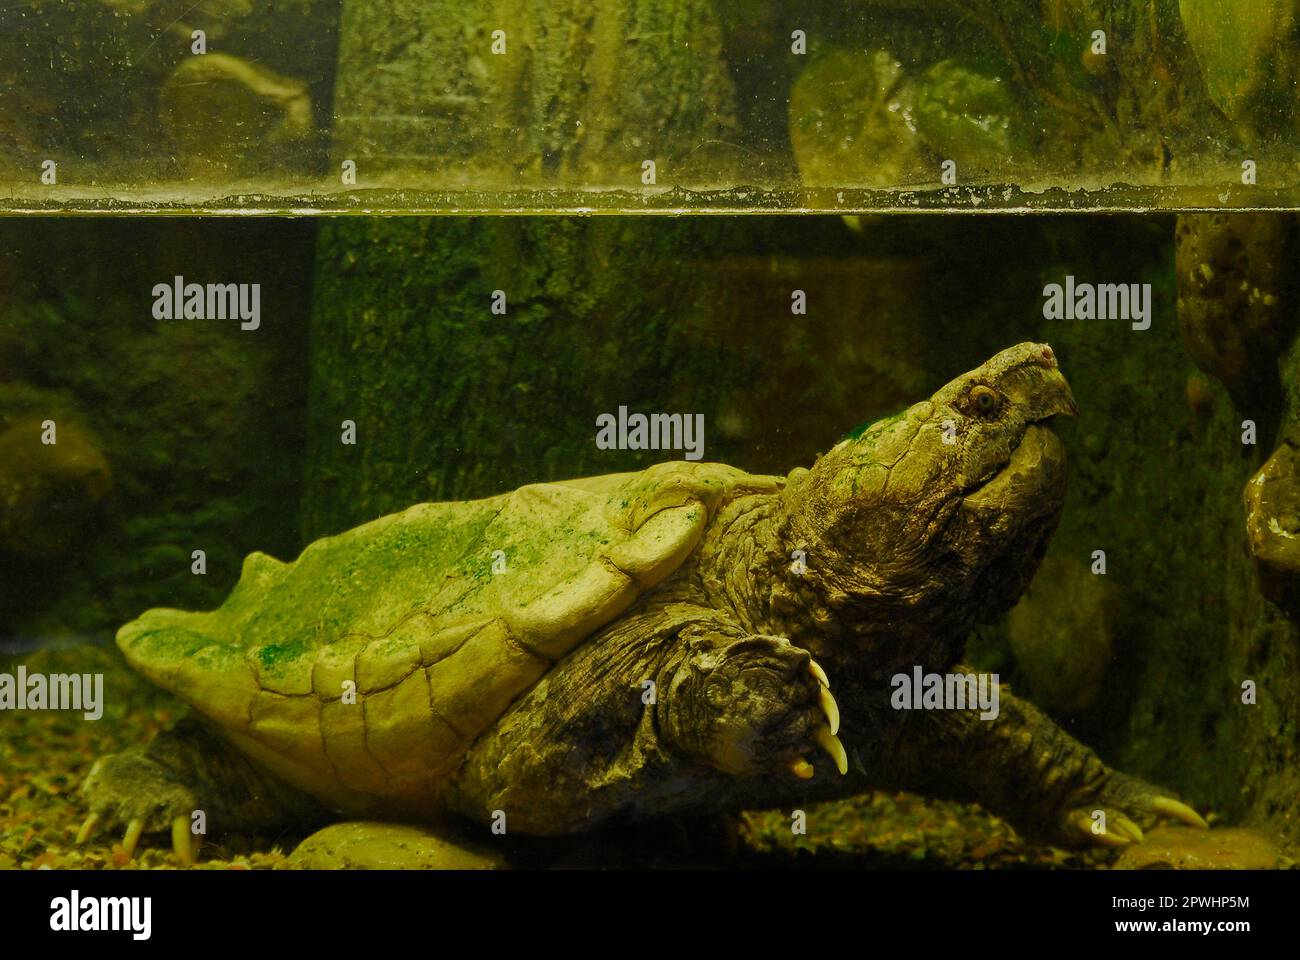 Alligator snapping turtle Stock Photo